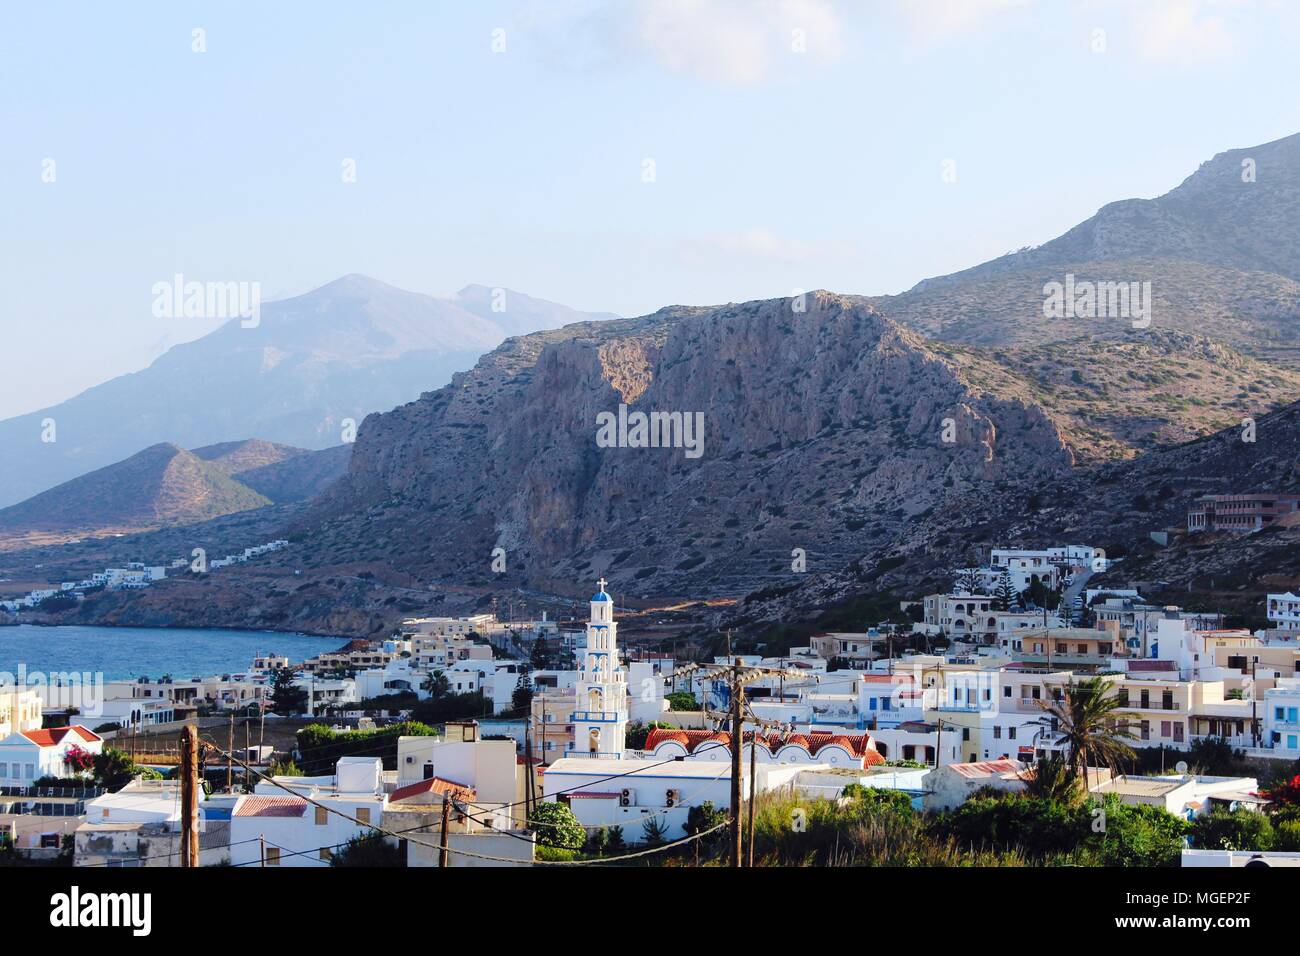 View of Arkasa village at dawn with the mountain headlands in the background on the island of Karpathos in Greece in the Mediterranean Sea Stock Photo